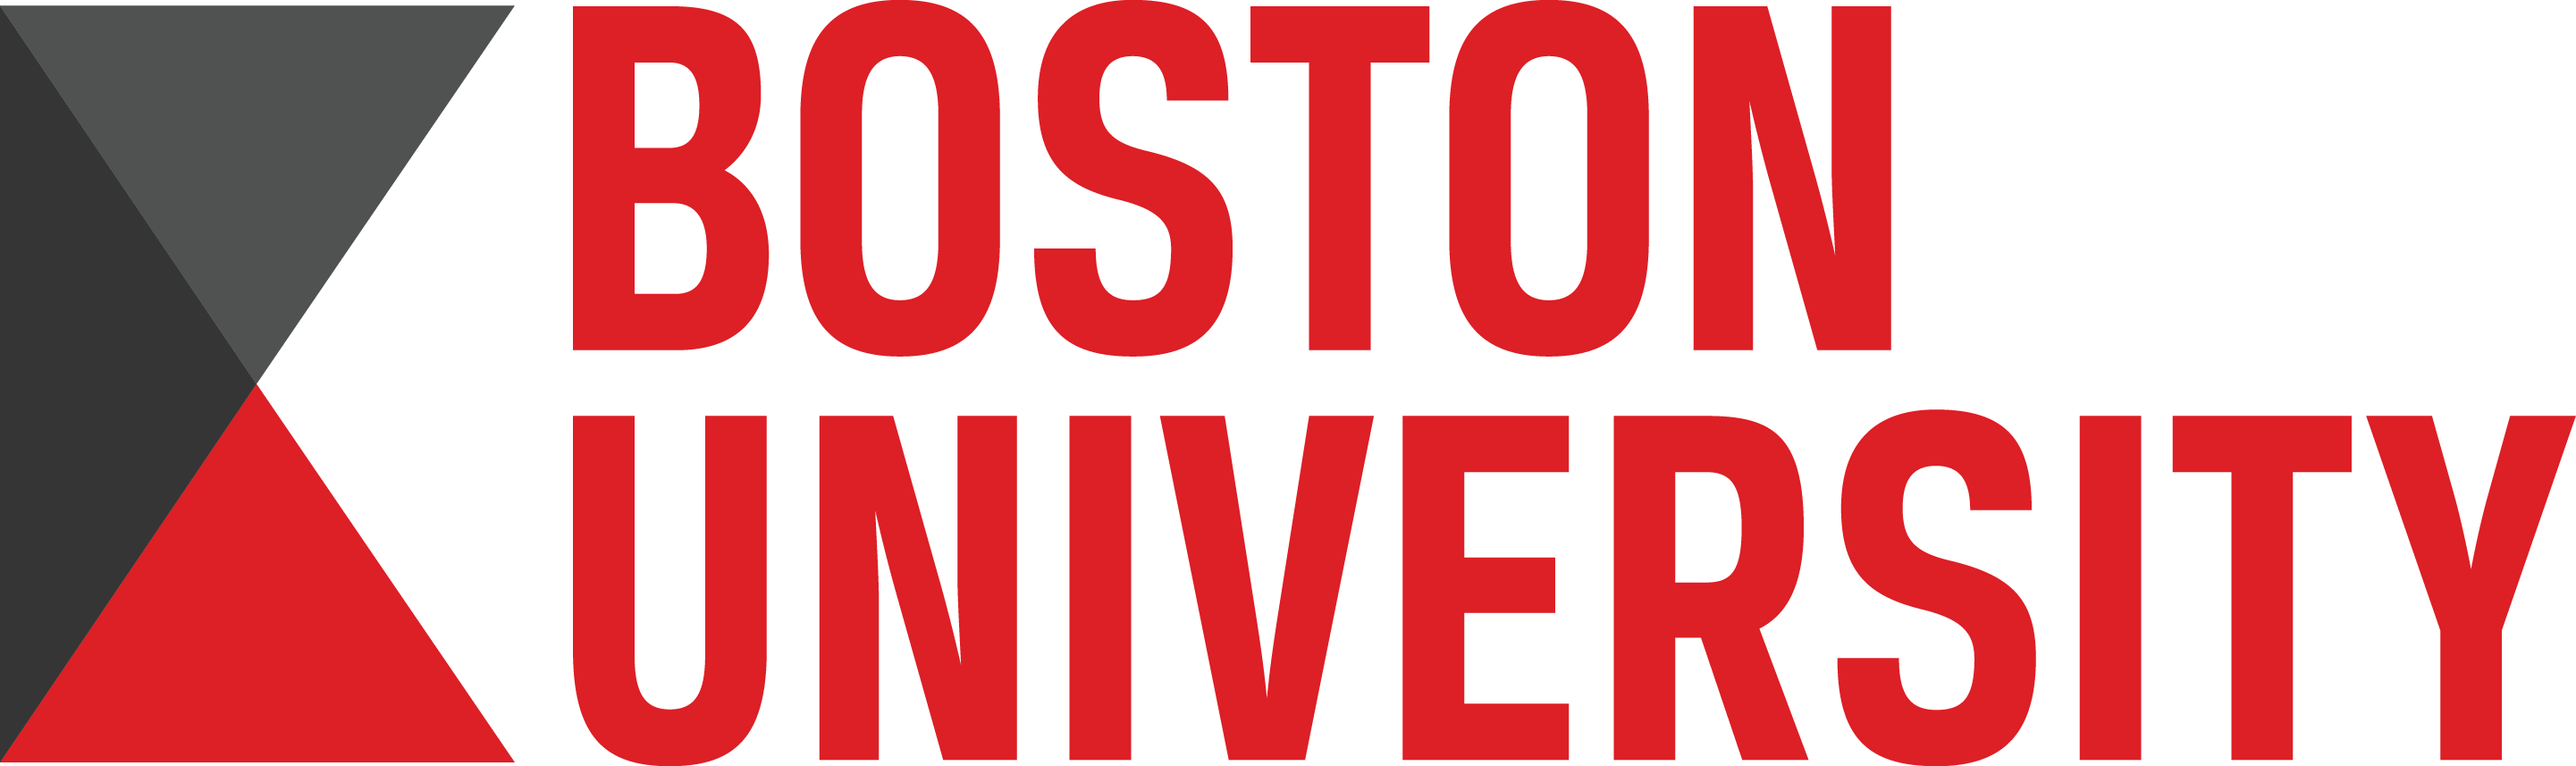 Boston University Logo Png Clipart Large Size Png Image PikPng